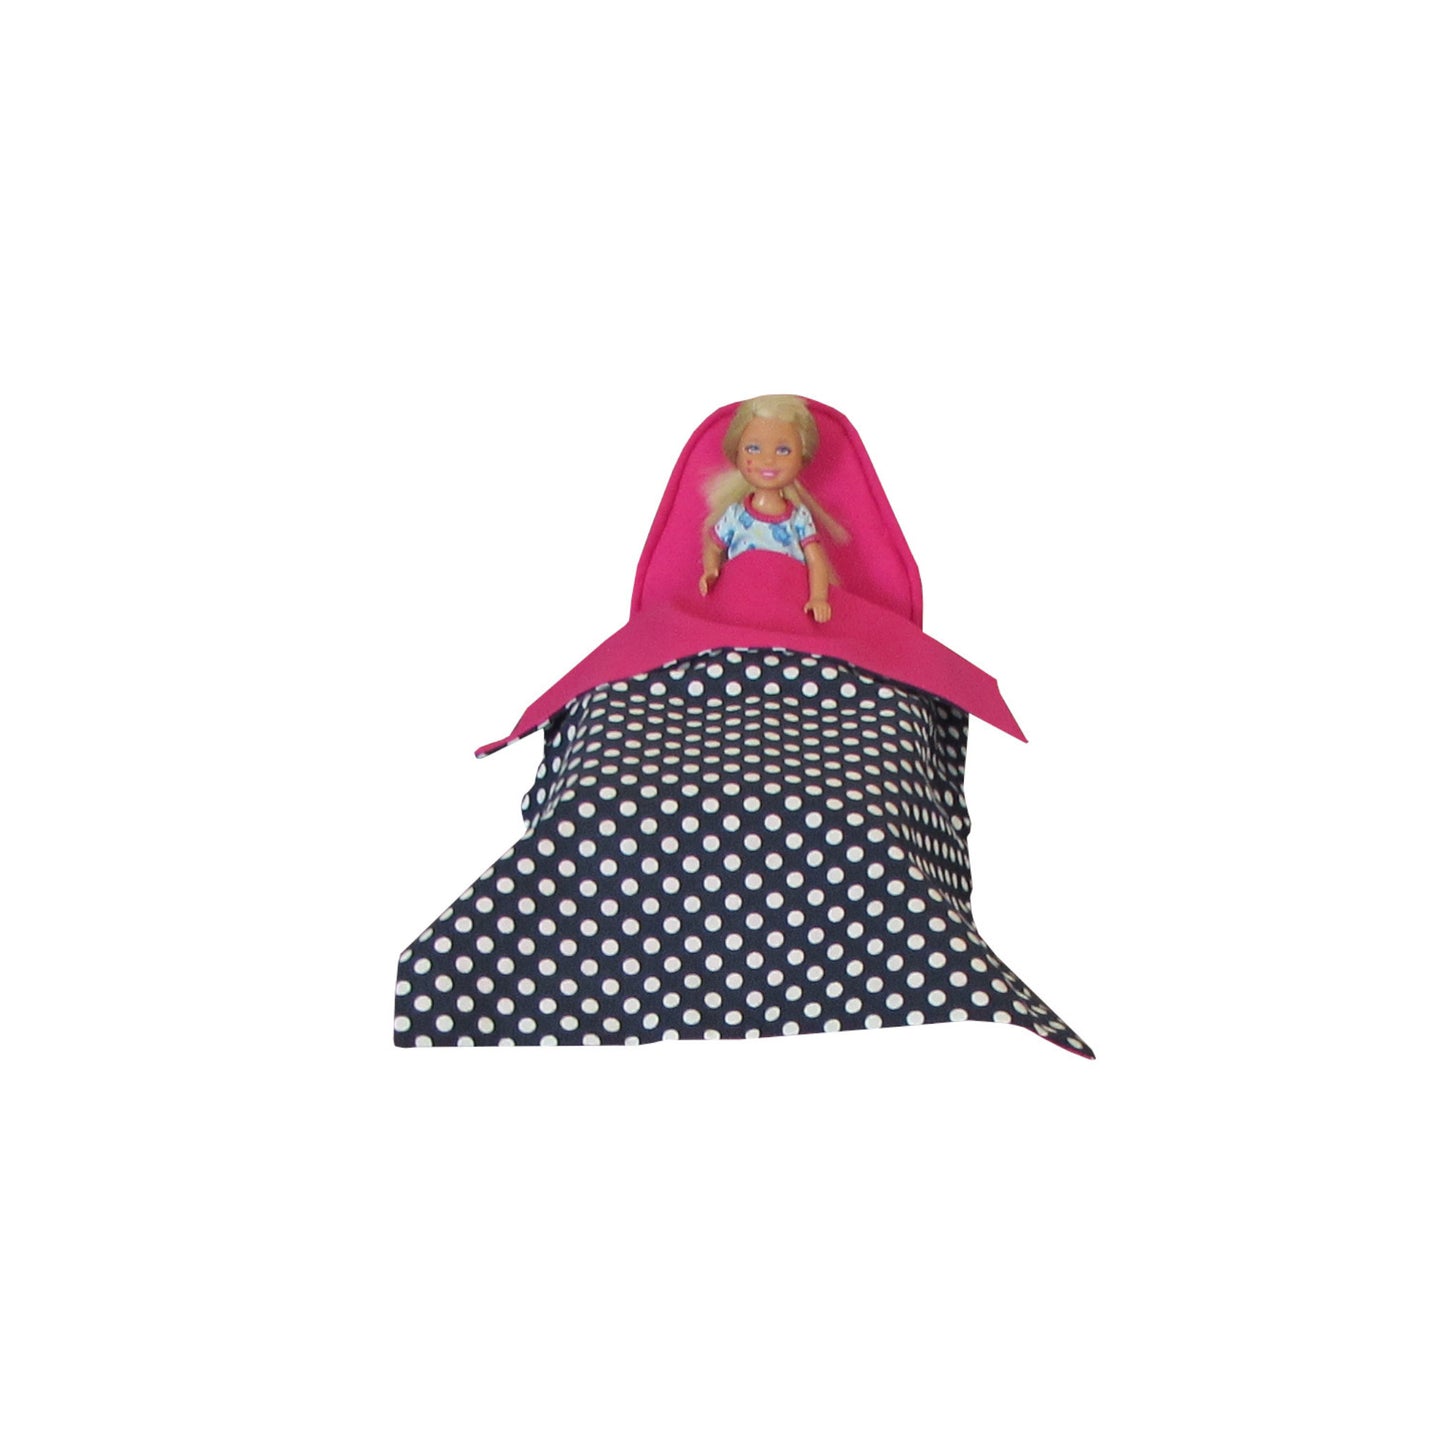 Bright Pink Doll Bed and Dots Dark Blue Doll Bedding for 6.5-inch dolls with doll